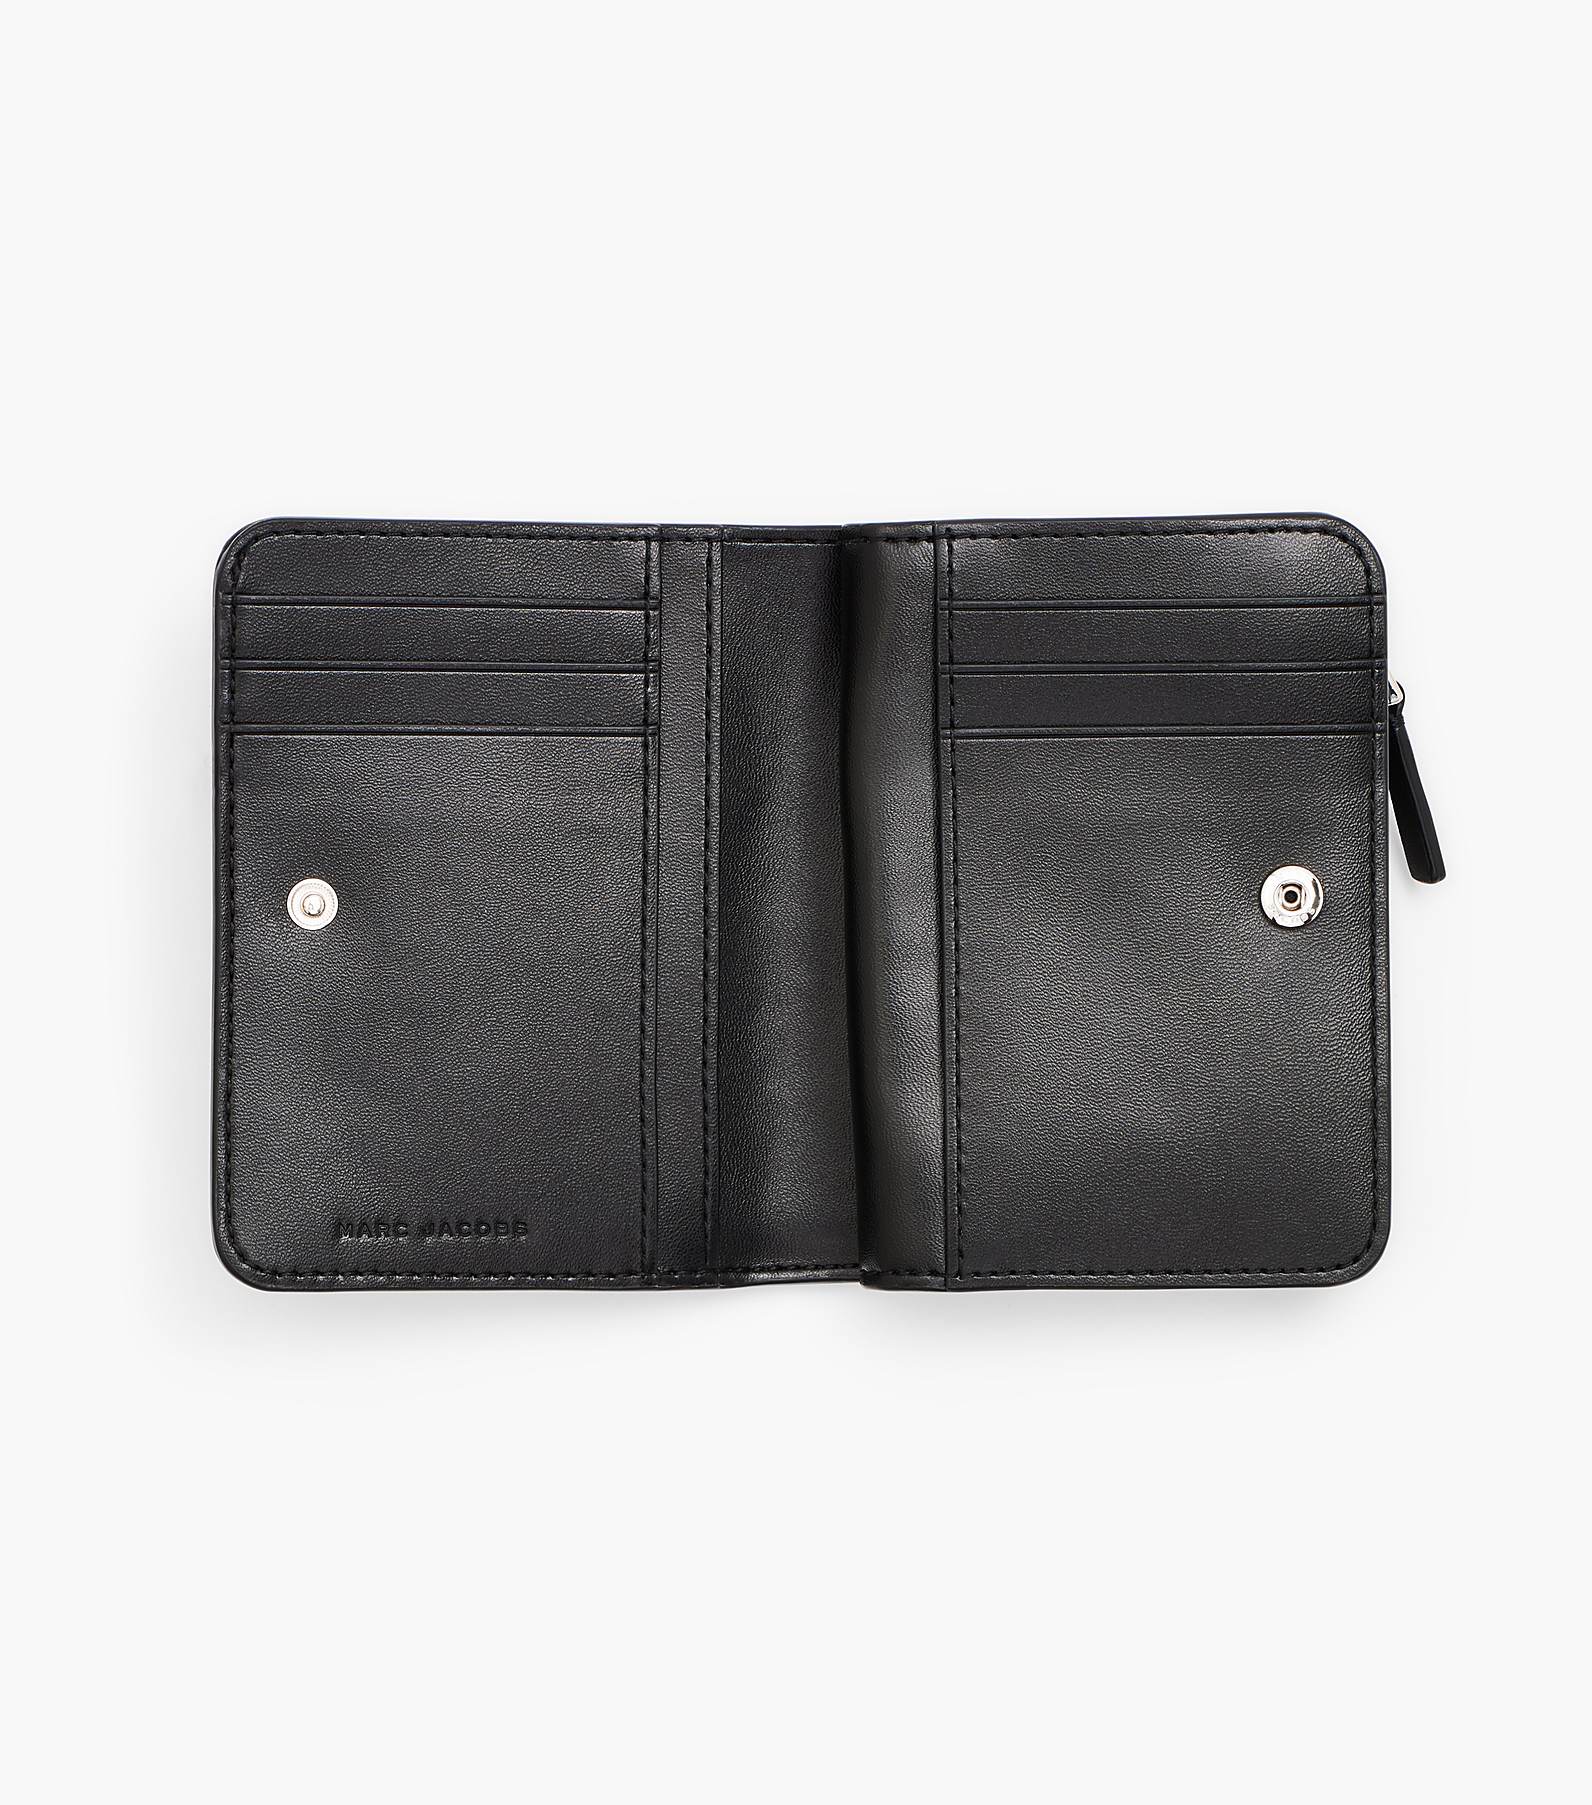 THE LEATHER COVERED J MARC COMPACT WALLET MINI